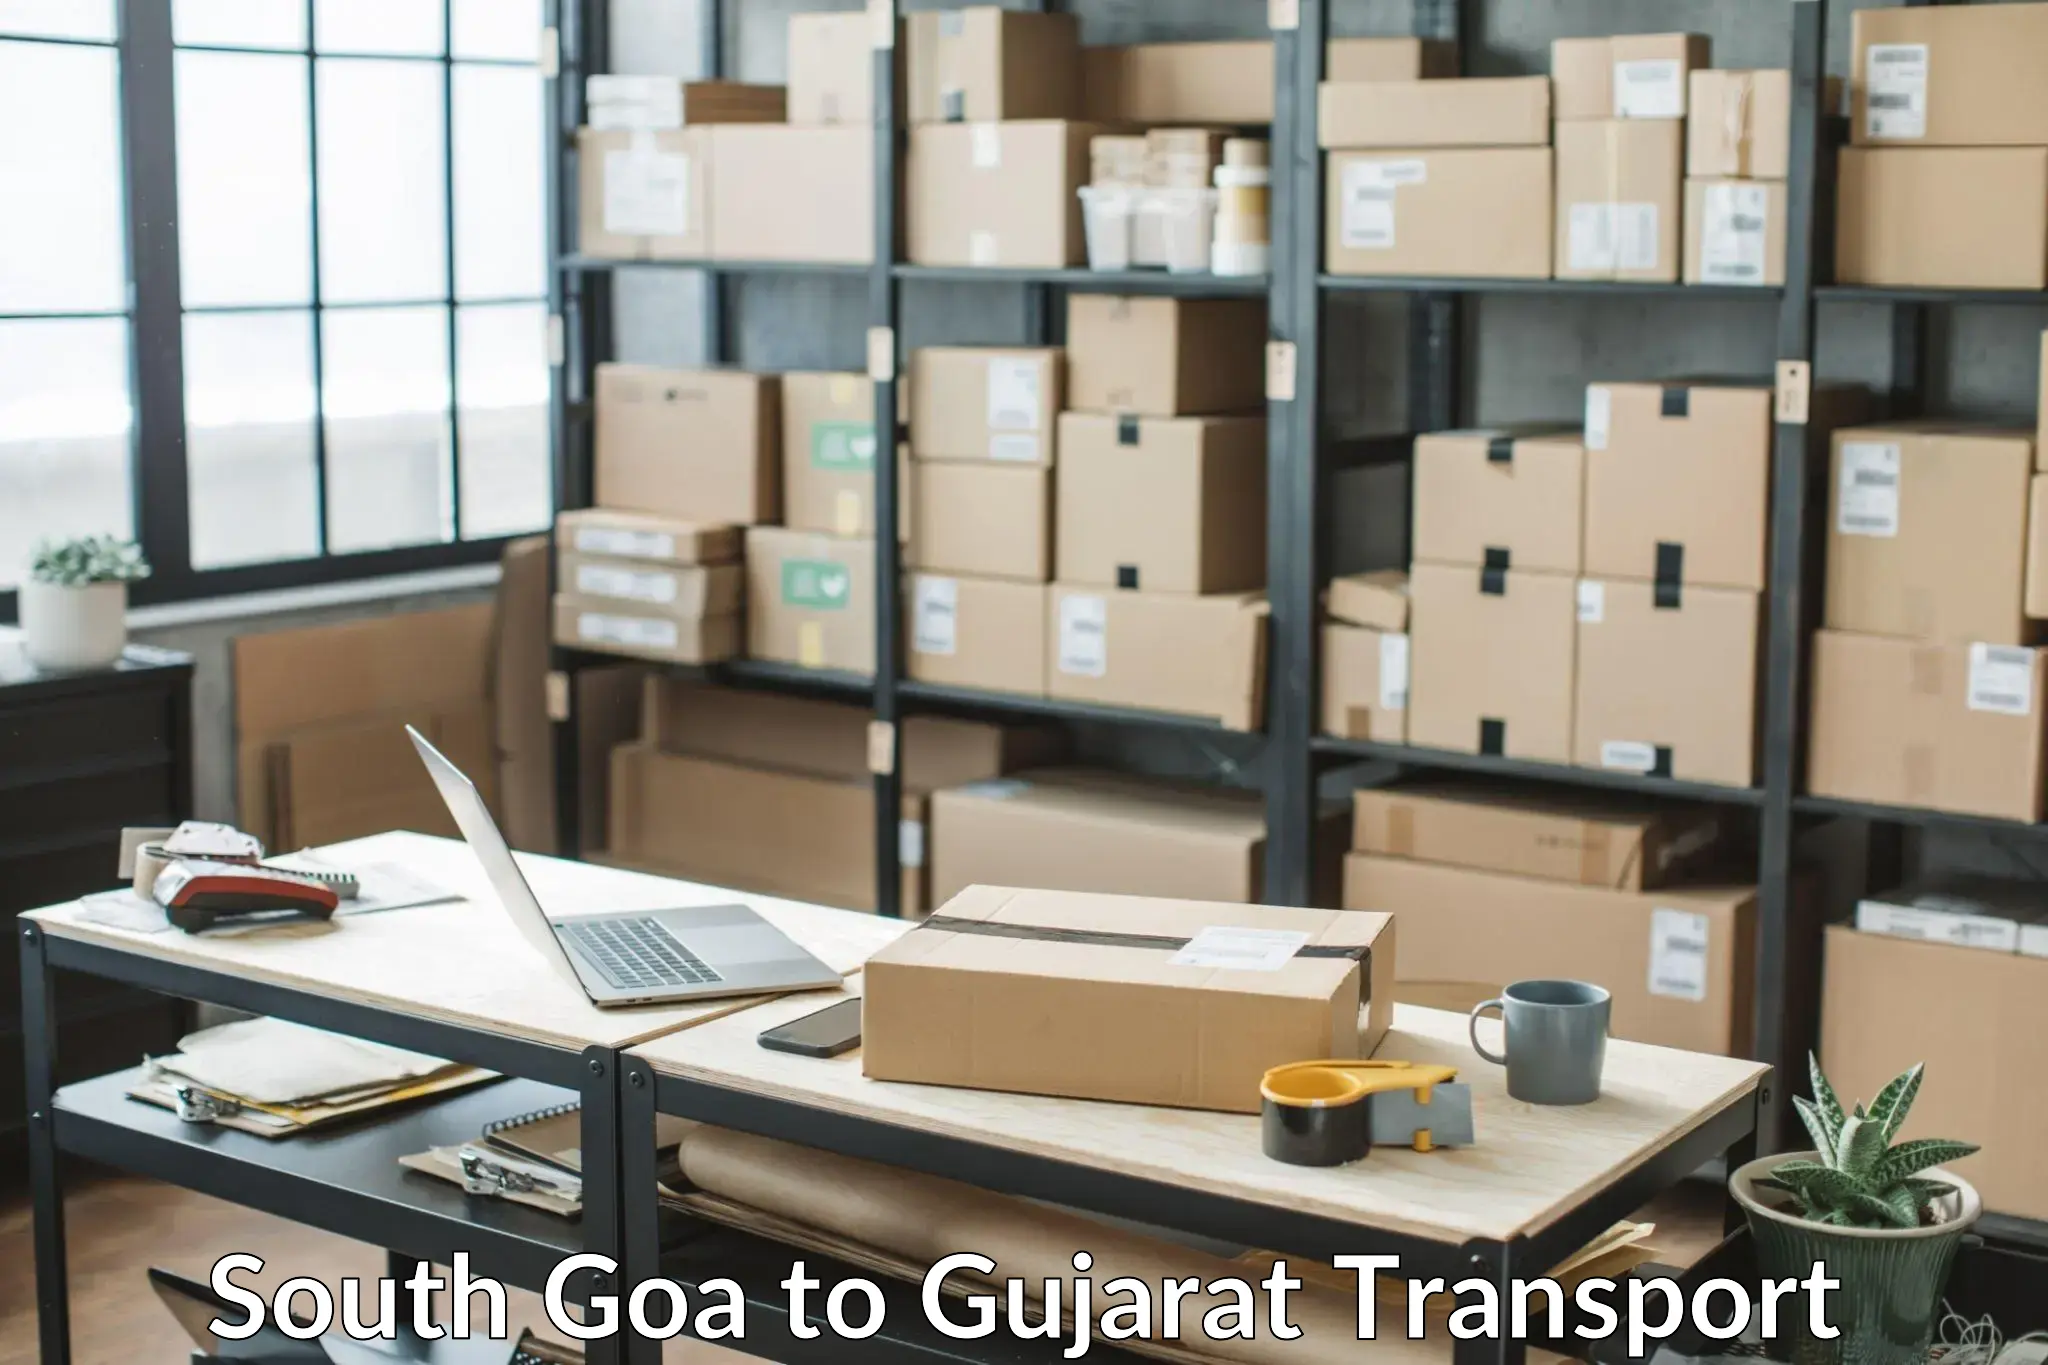 Delivery service South Goa to Gujarat